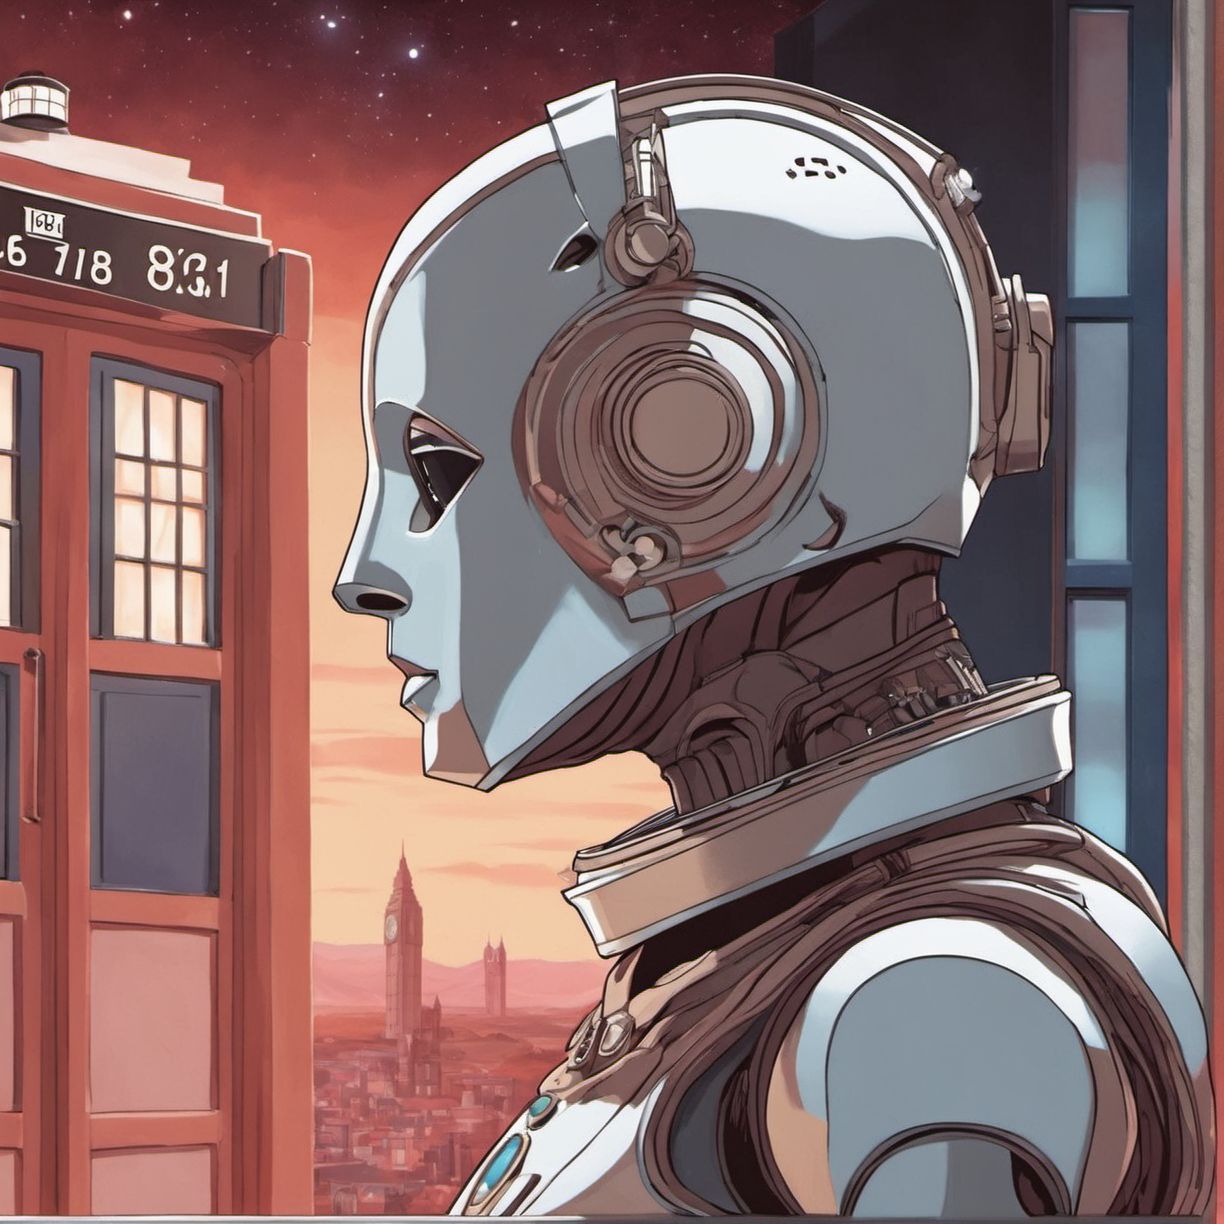 A frame from the show Doctor Who featuring a cyberman Lofi girl